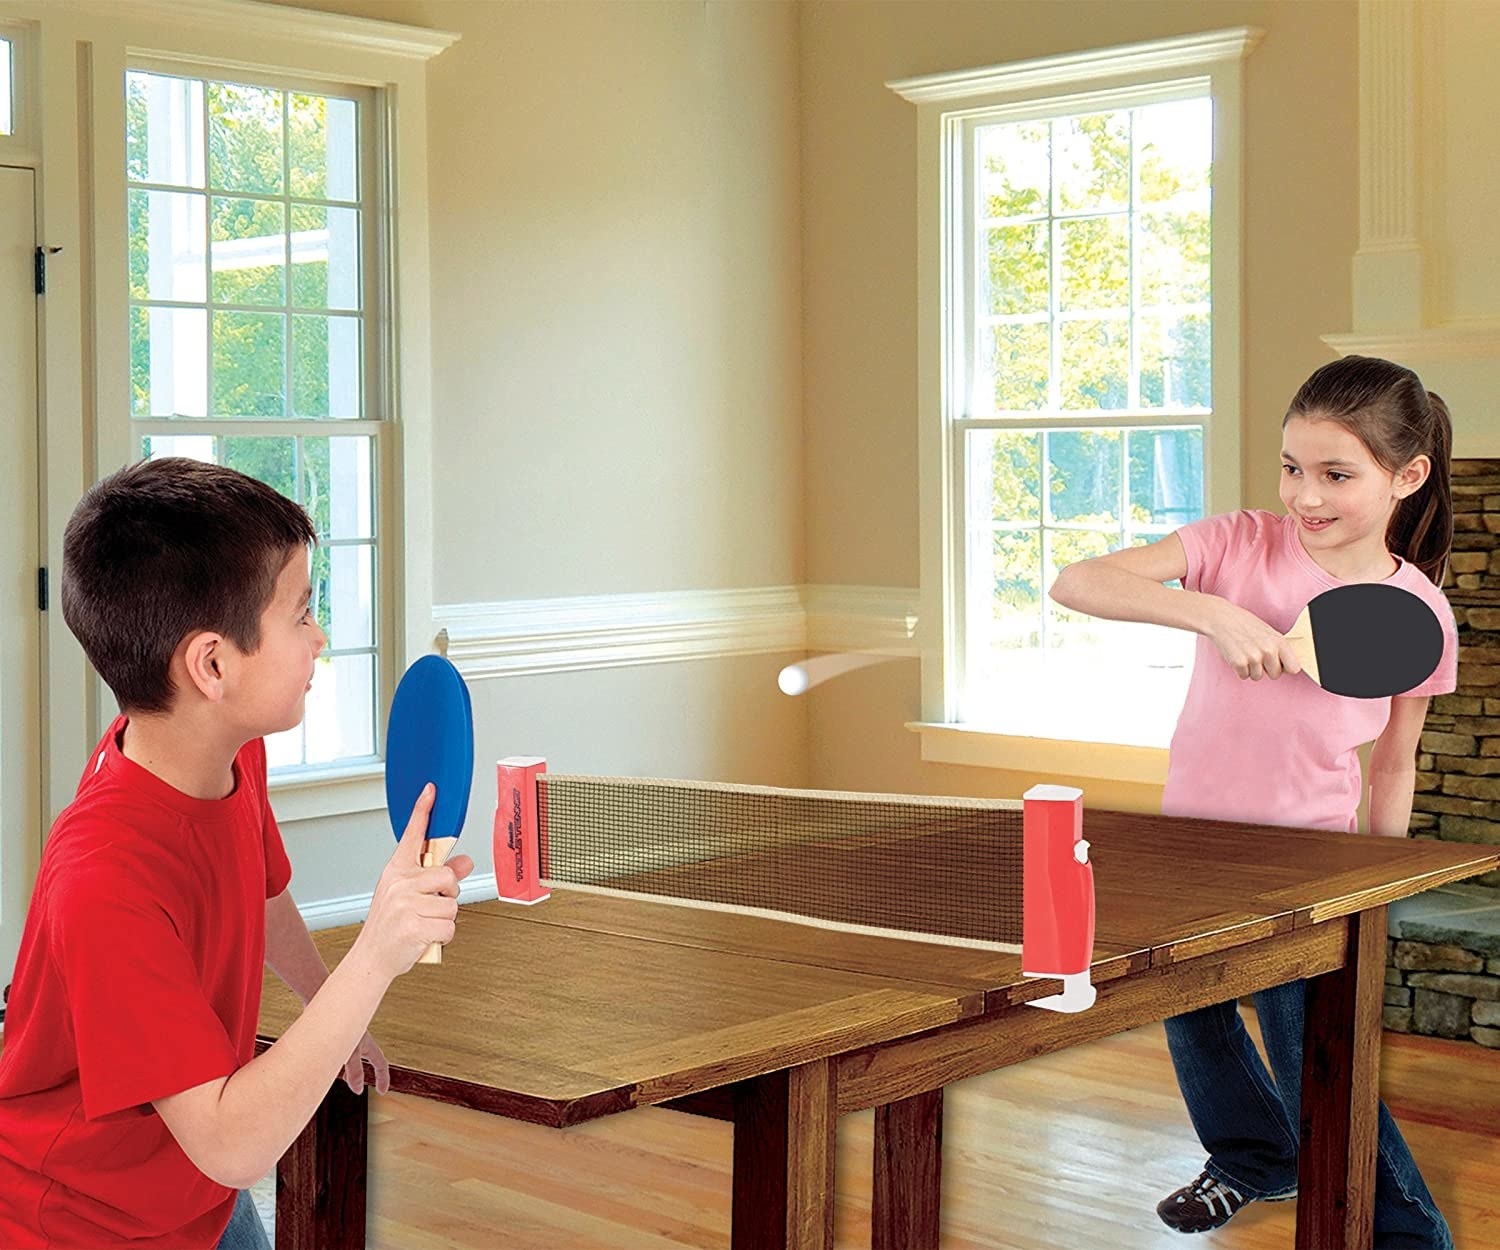 Kids playing ping pong with an attached net at a dining room table 